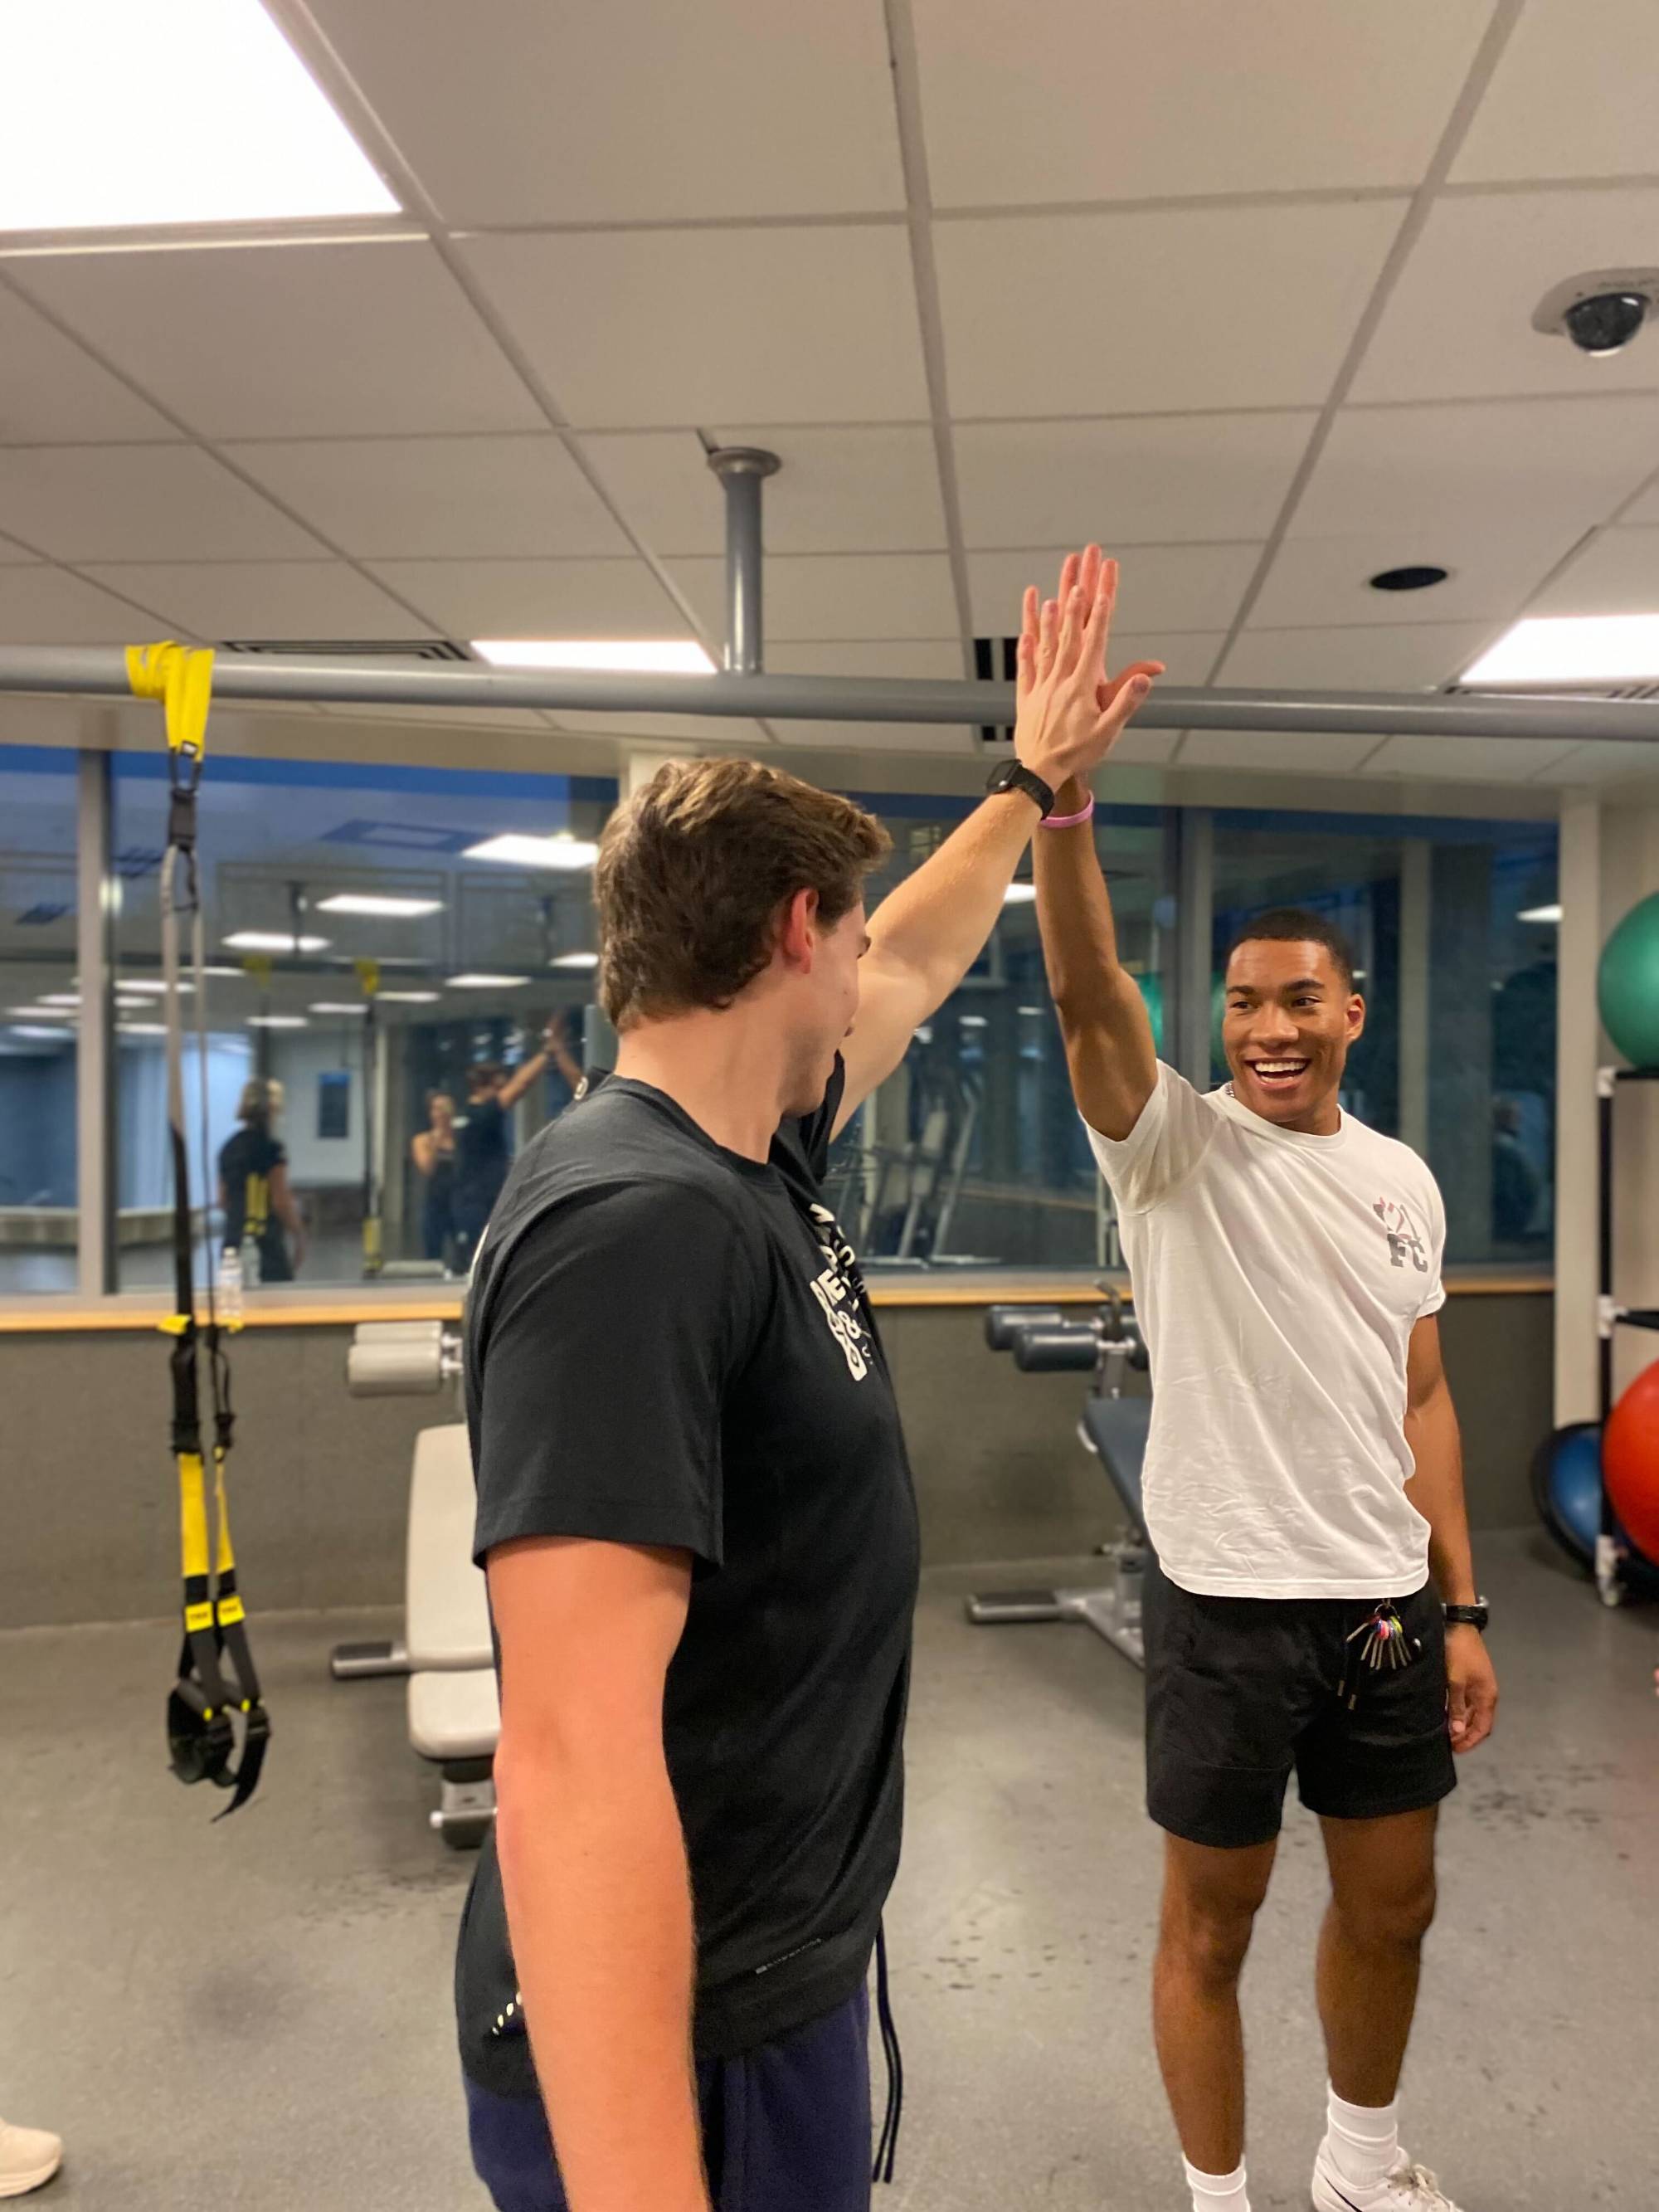 Instructor and student on Spin bikes doing a high five.